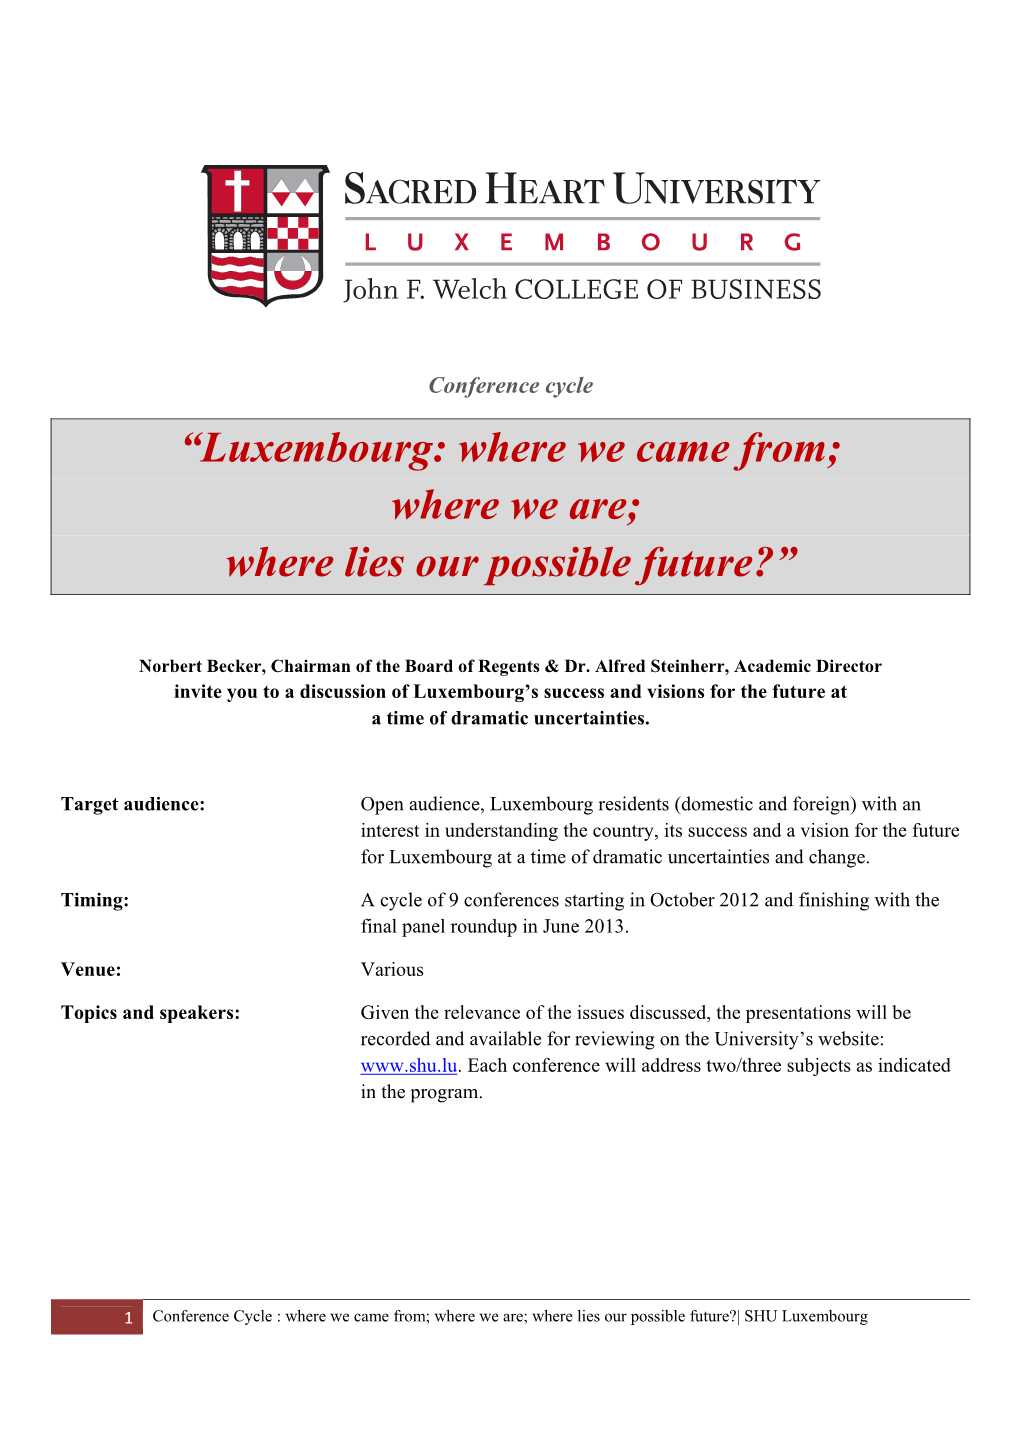 “Luxembourg: Where We Came From; Where We Are; Where Lies Our Possible Future?”